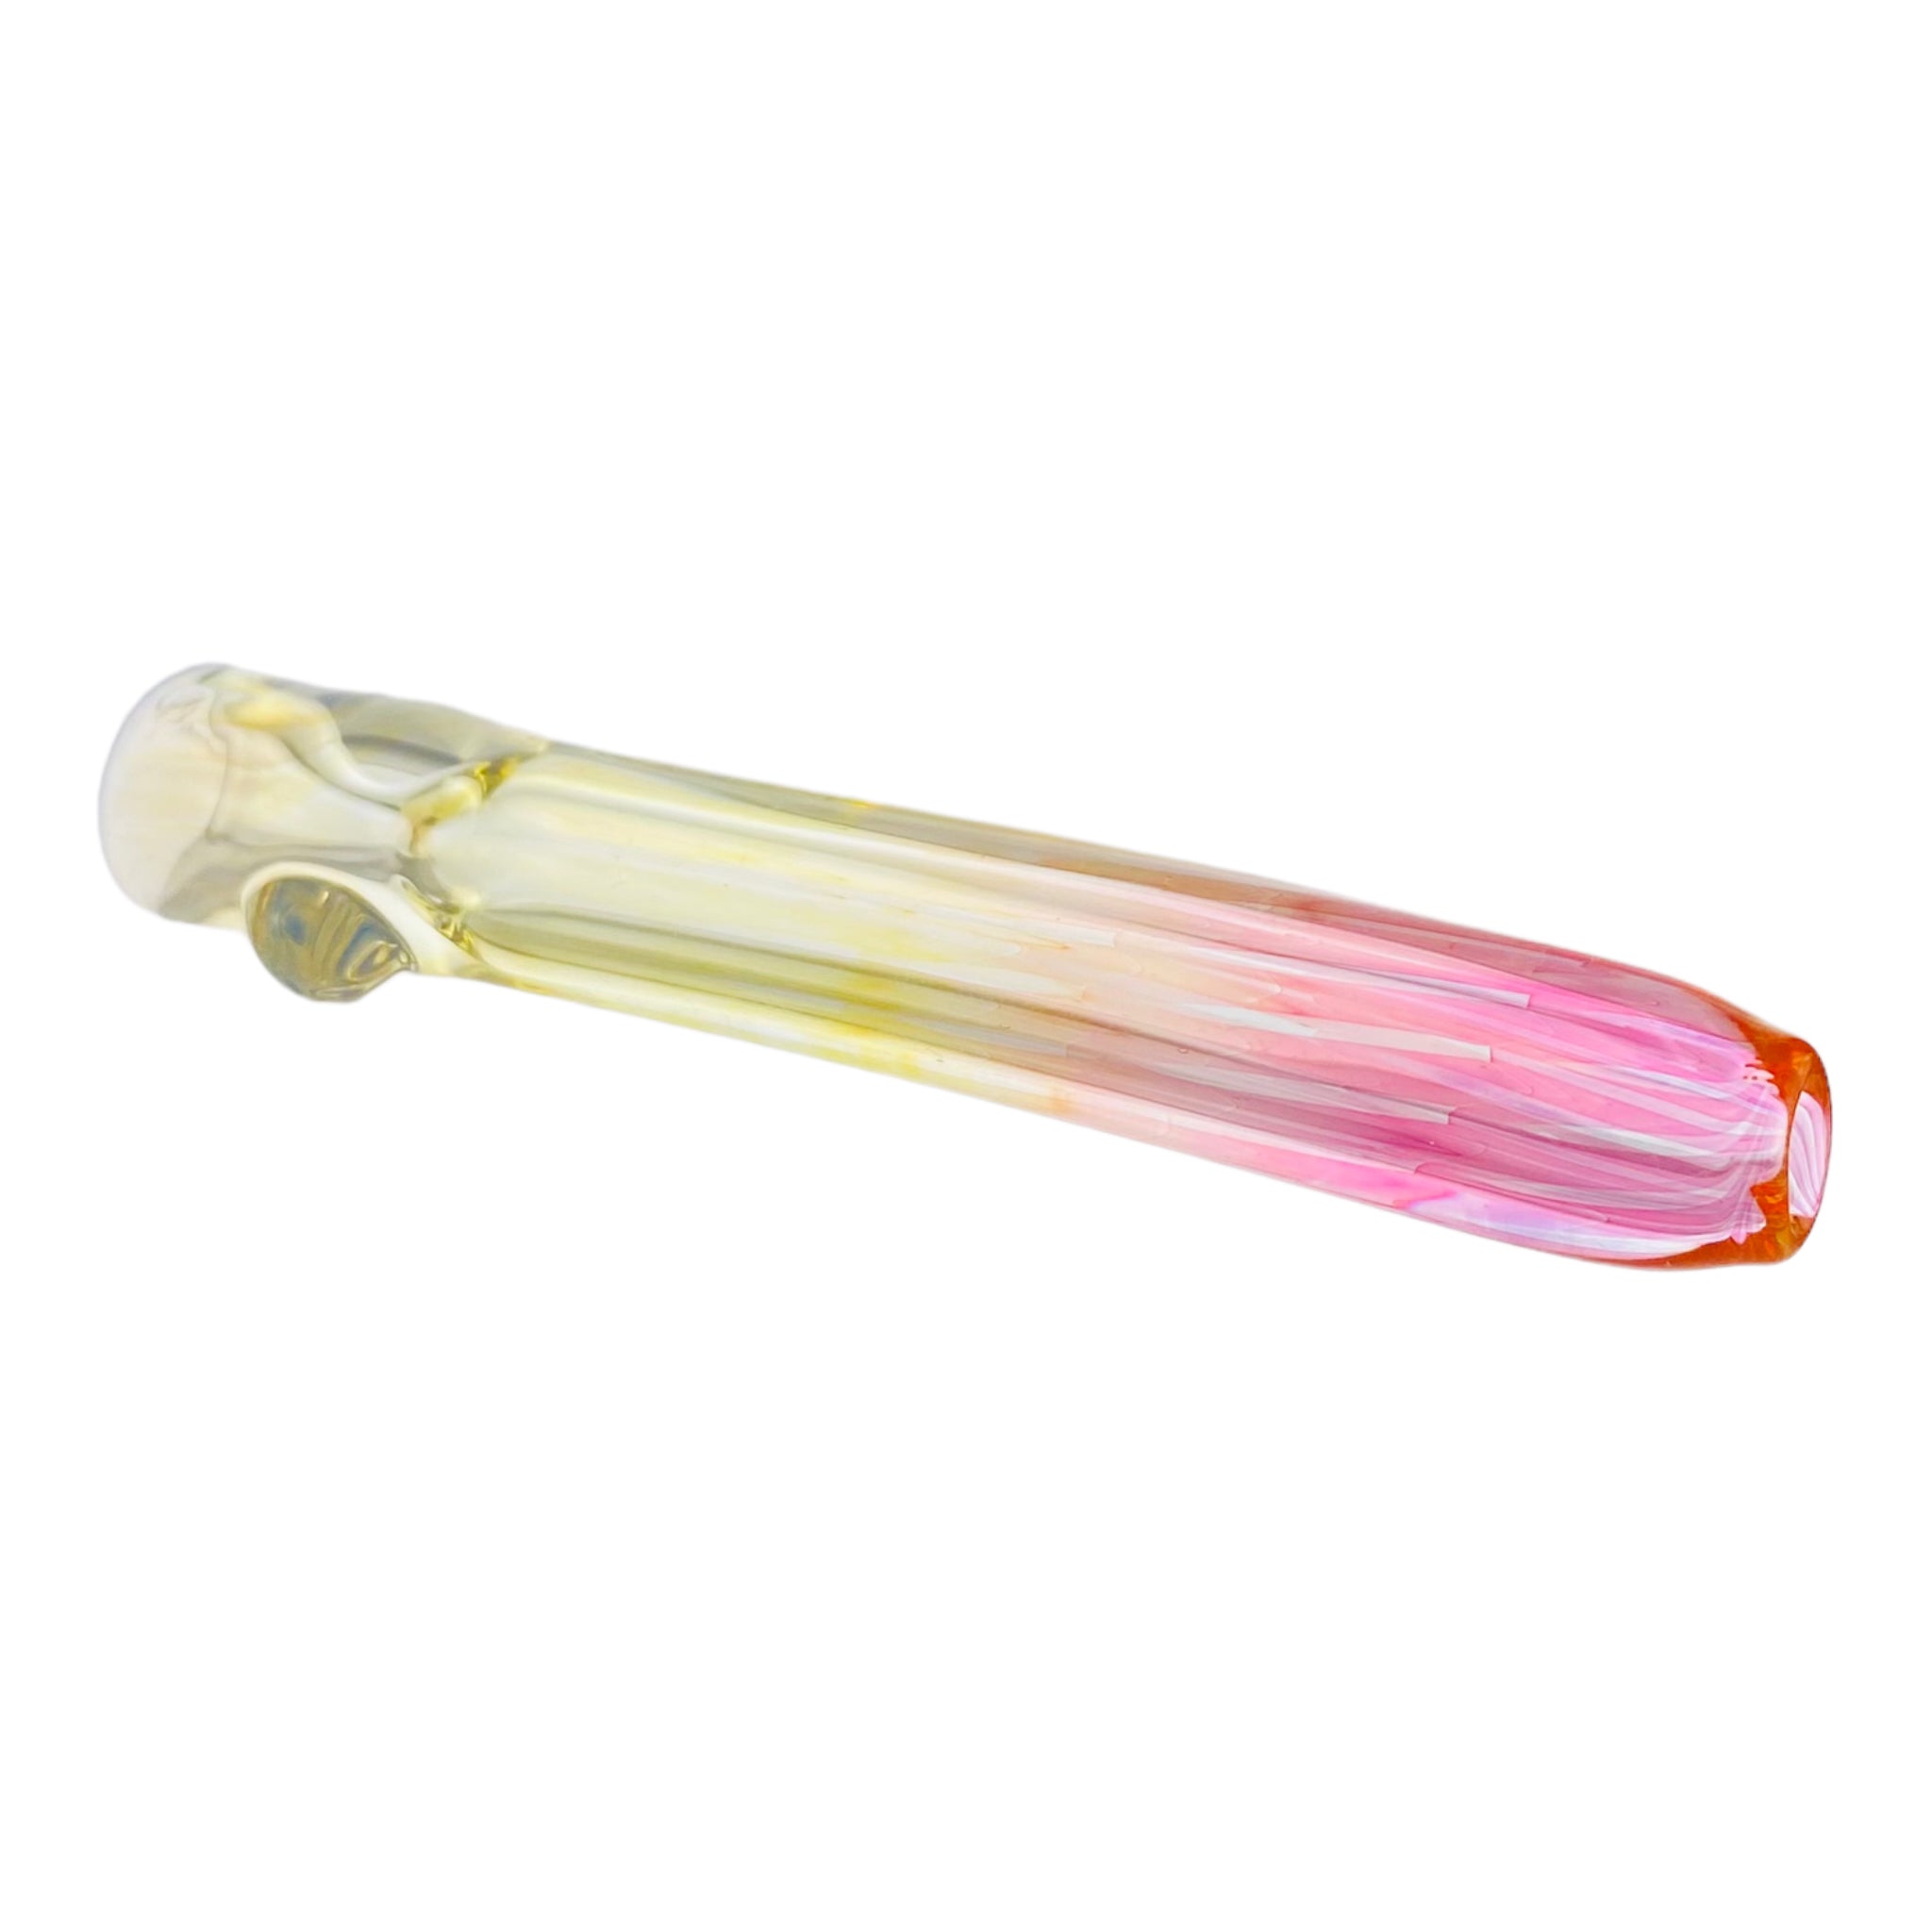 Glass Chillum Pipe - Yellow Silver Fuming To Pink Gold Fuming Fade